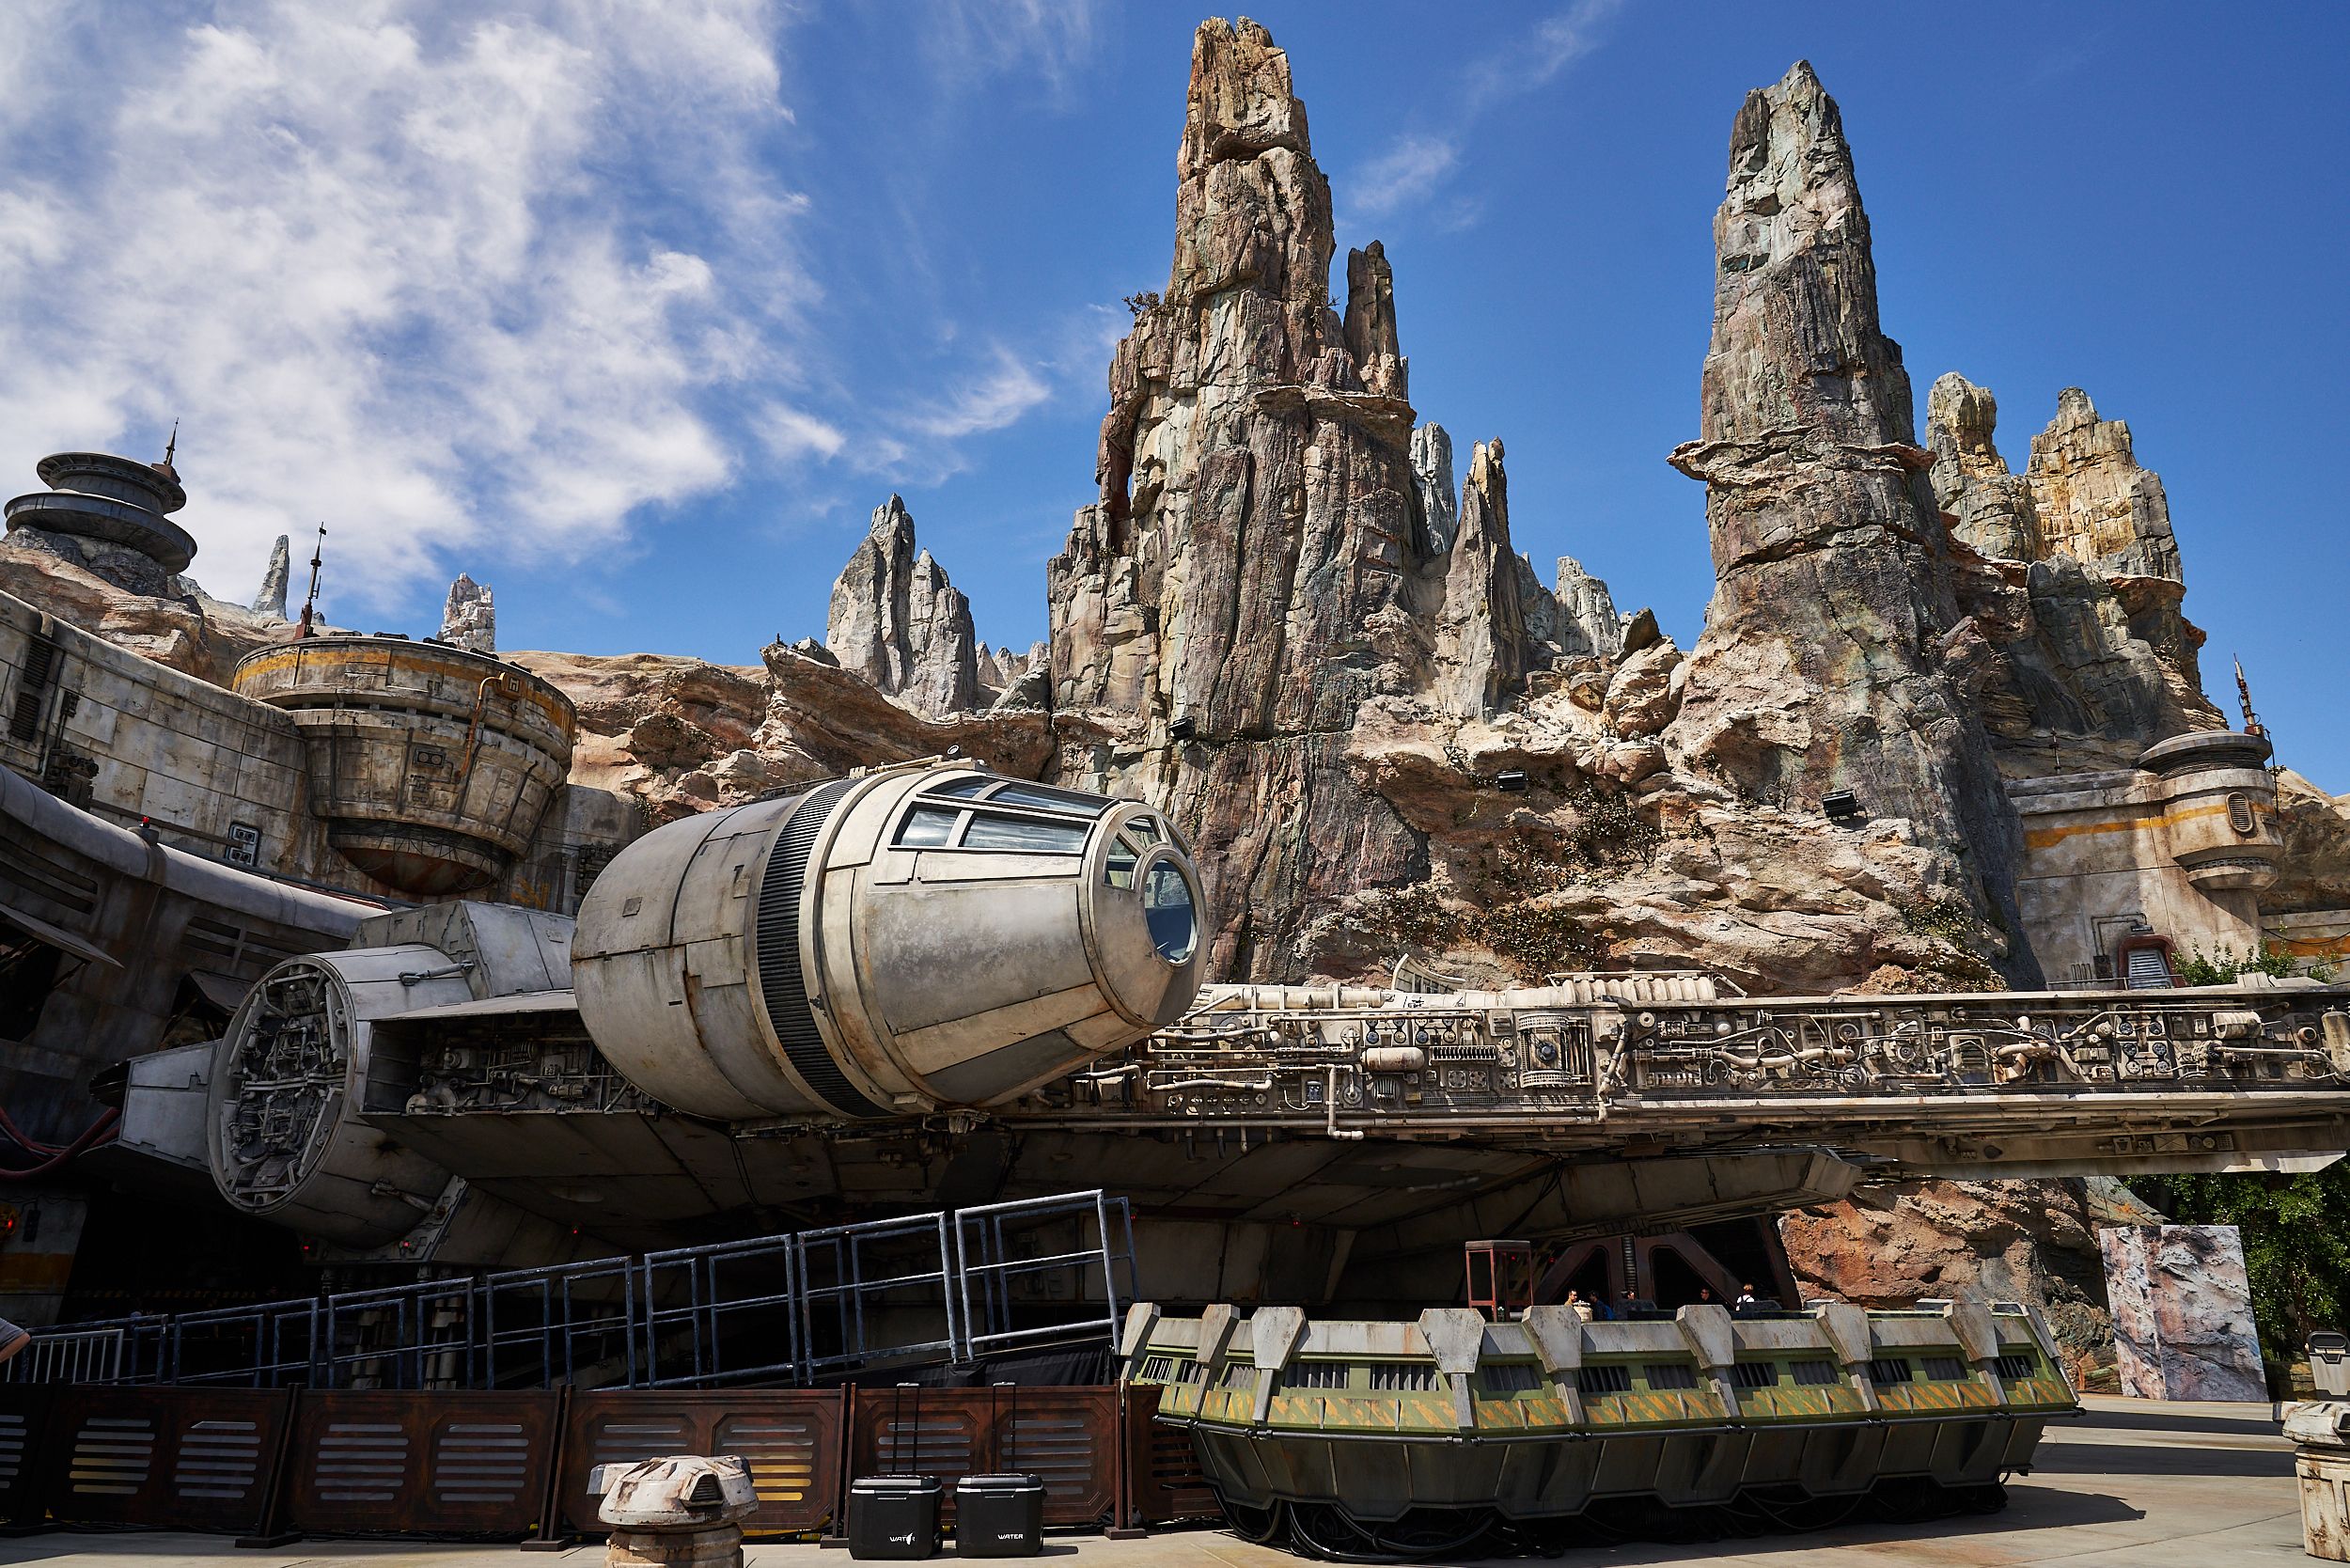 gear – Living History in the Star Wars Galaxy